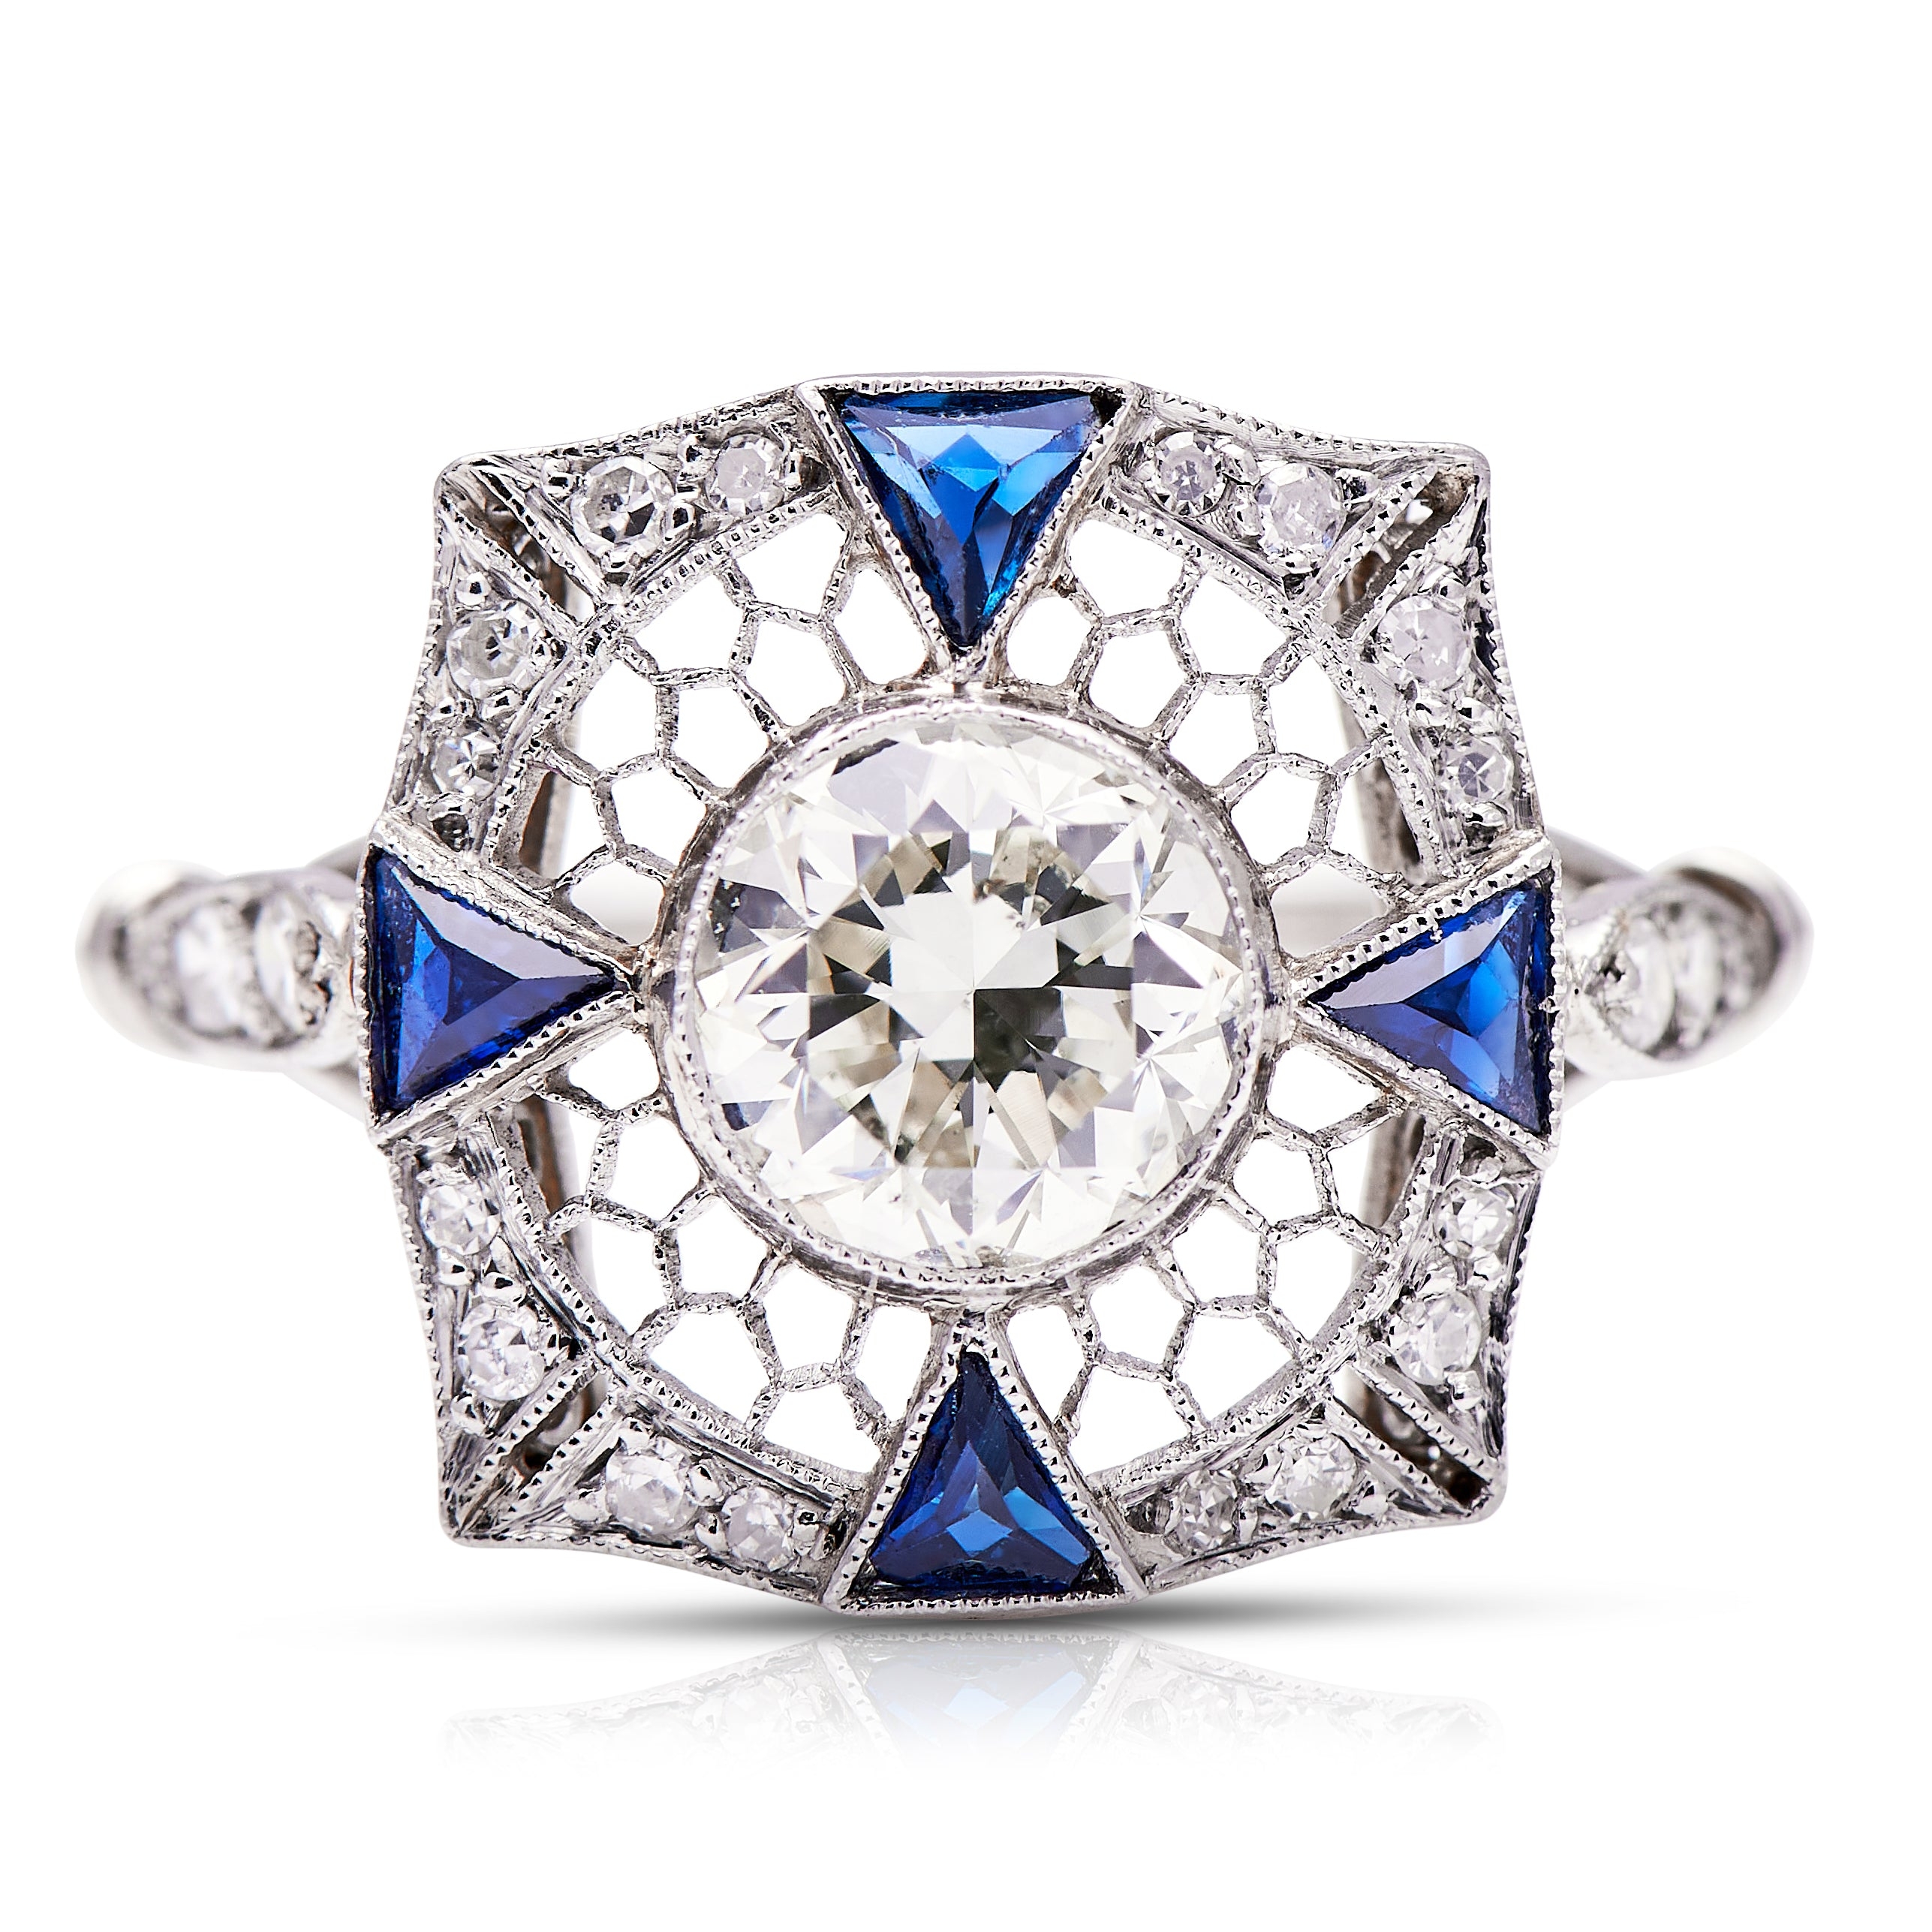 Vintage, Platinum, Diamond and Sapphire Ring – Vintage Ring – Antique Ring Boutique